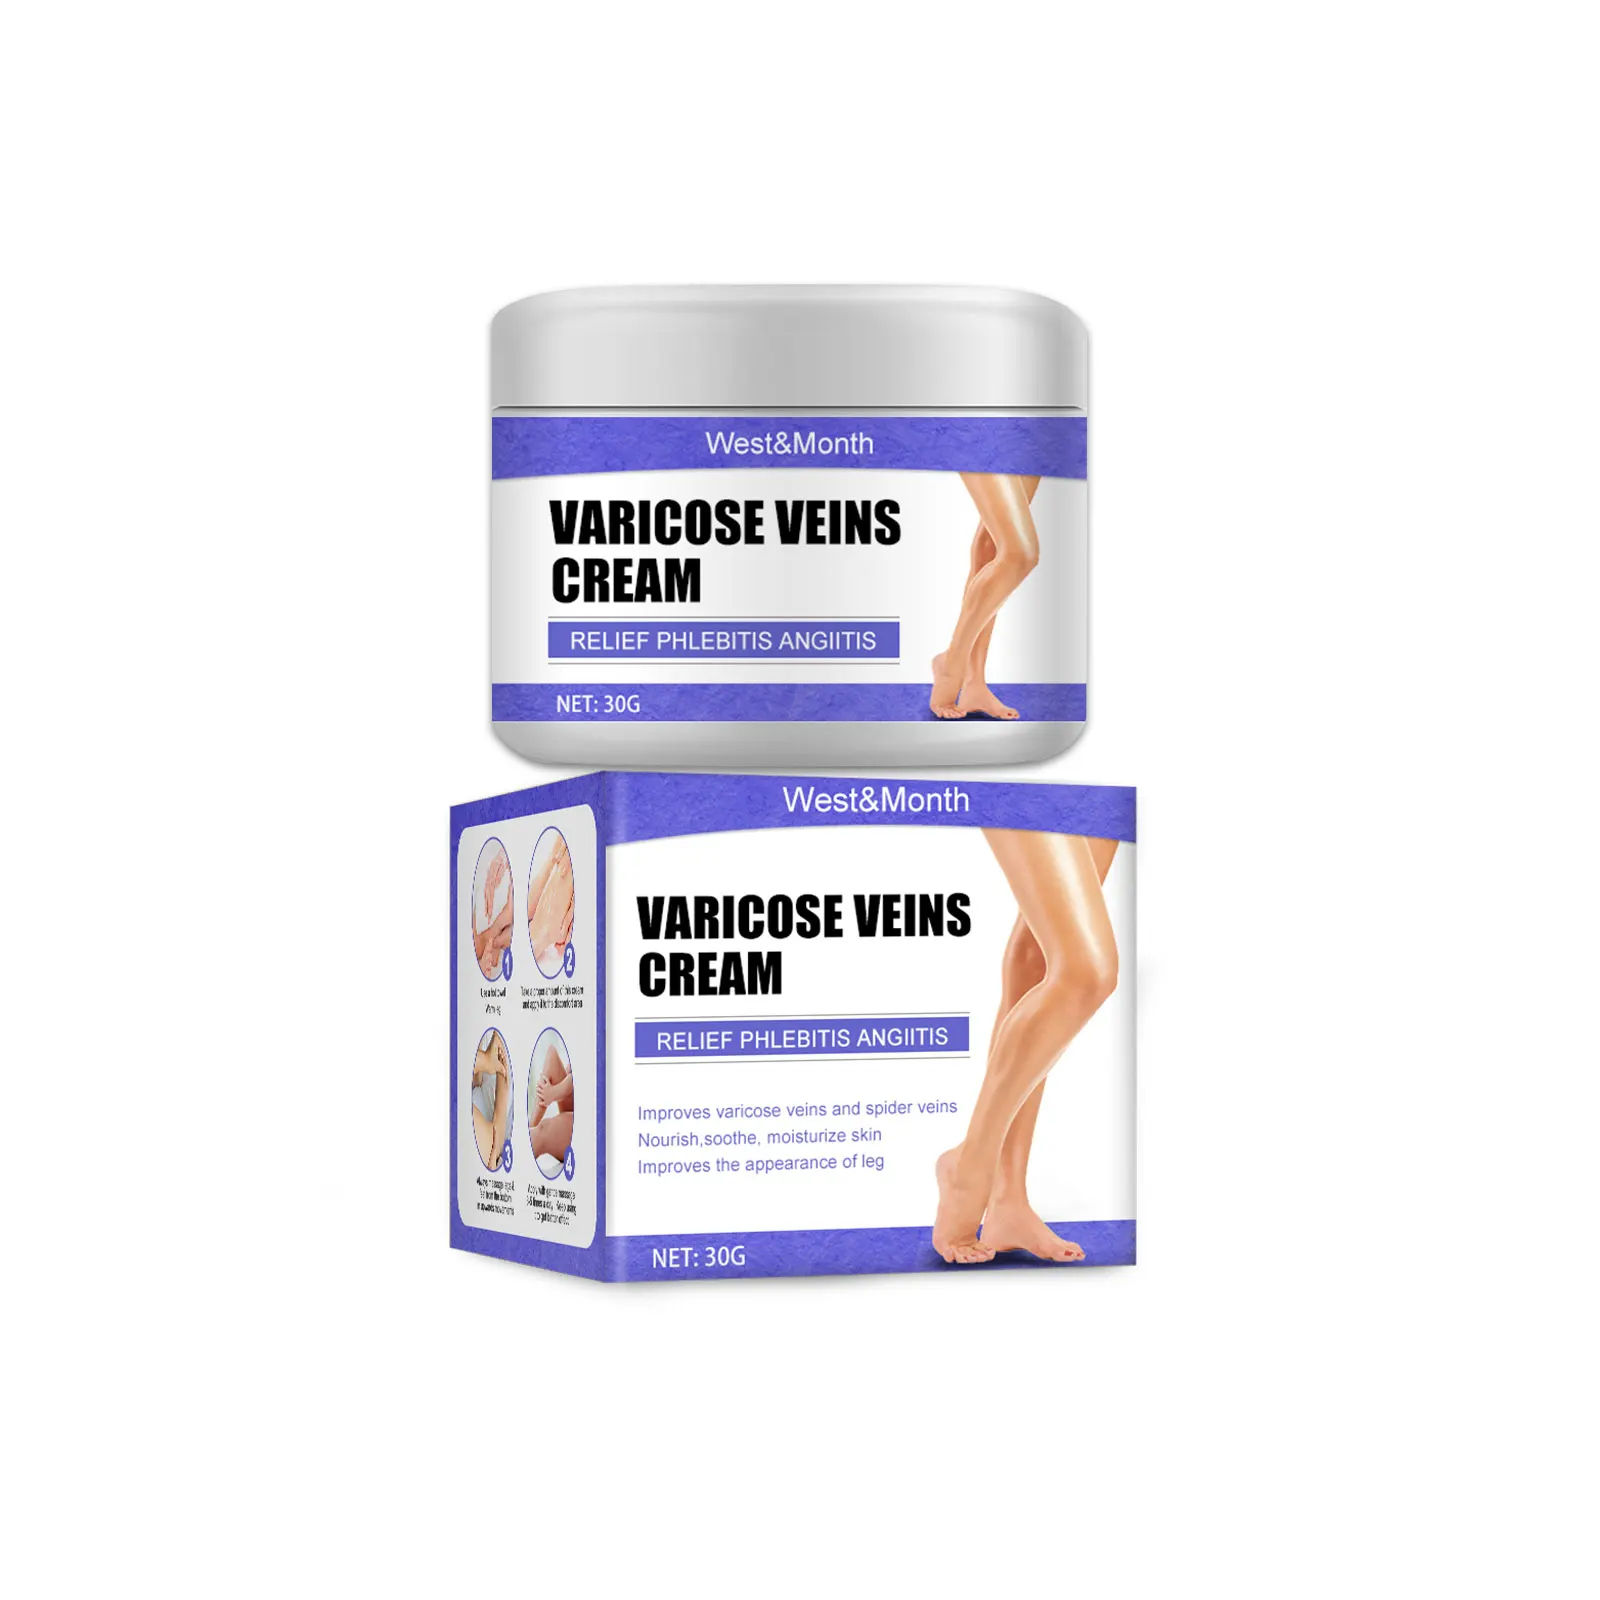 Hot selling product Relieves Phlebitis Vasculitis Improves Blood Circulation Varicose Veins Cream (1600463311516)